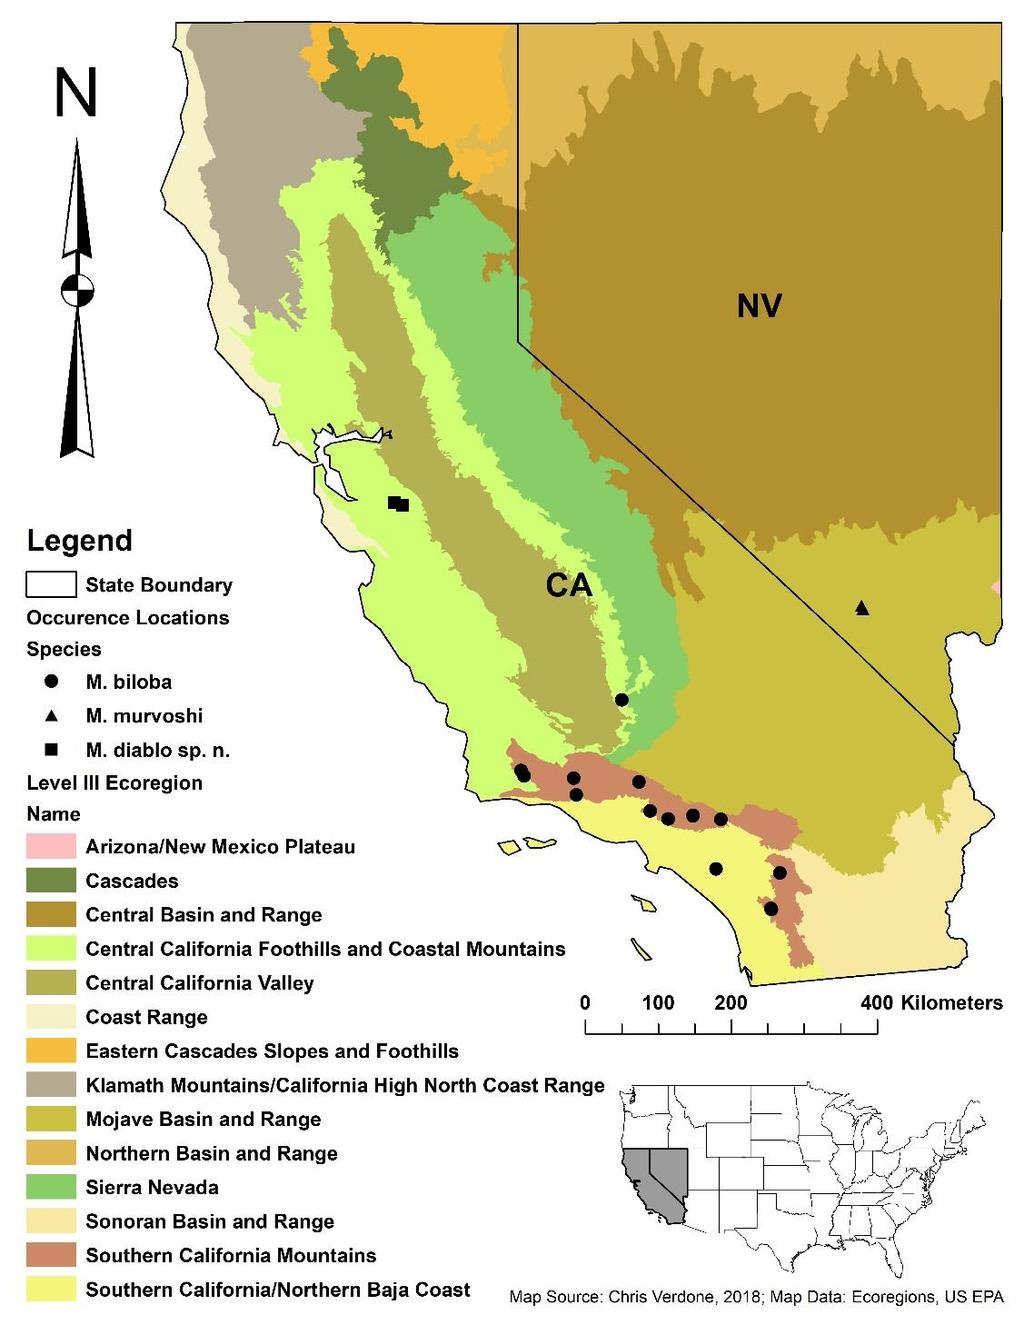 Fig. 1. Distribution of examined material of Malenka biloba, M. diablo sp. n., and M. murvoshi, and level III ecoregions of California and Nevada. using GEOLocate v. 3.